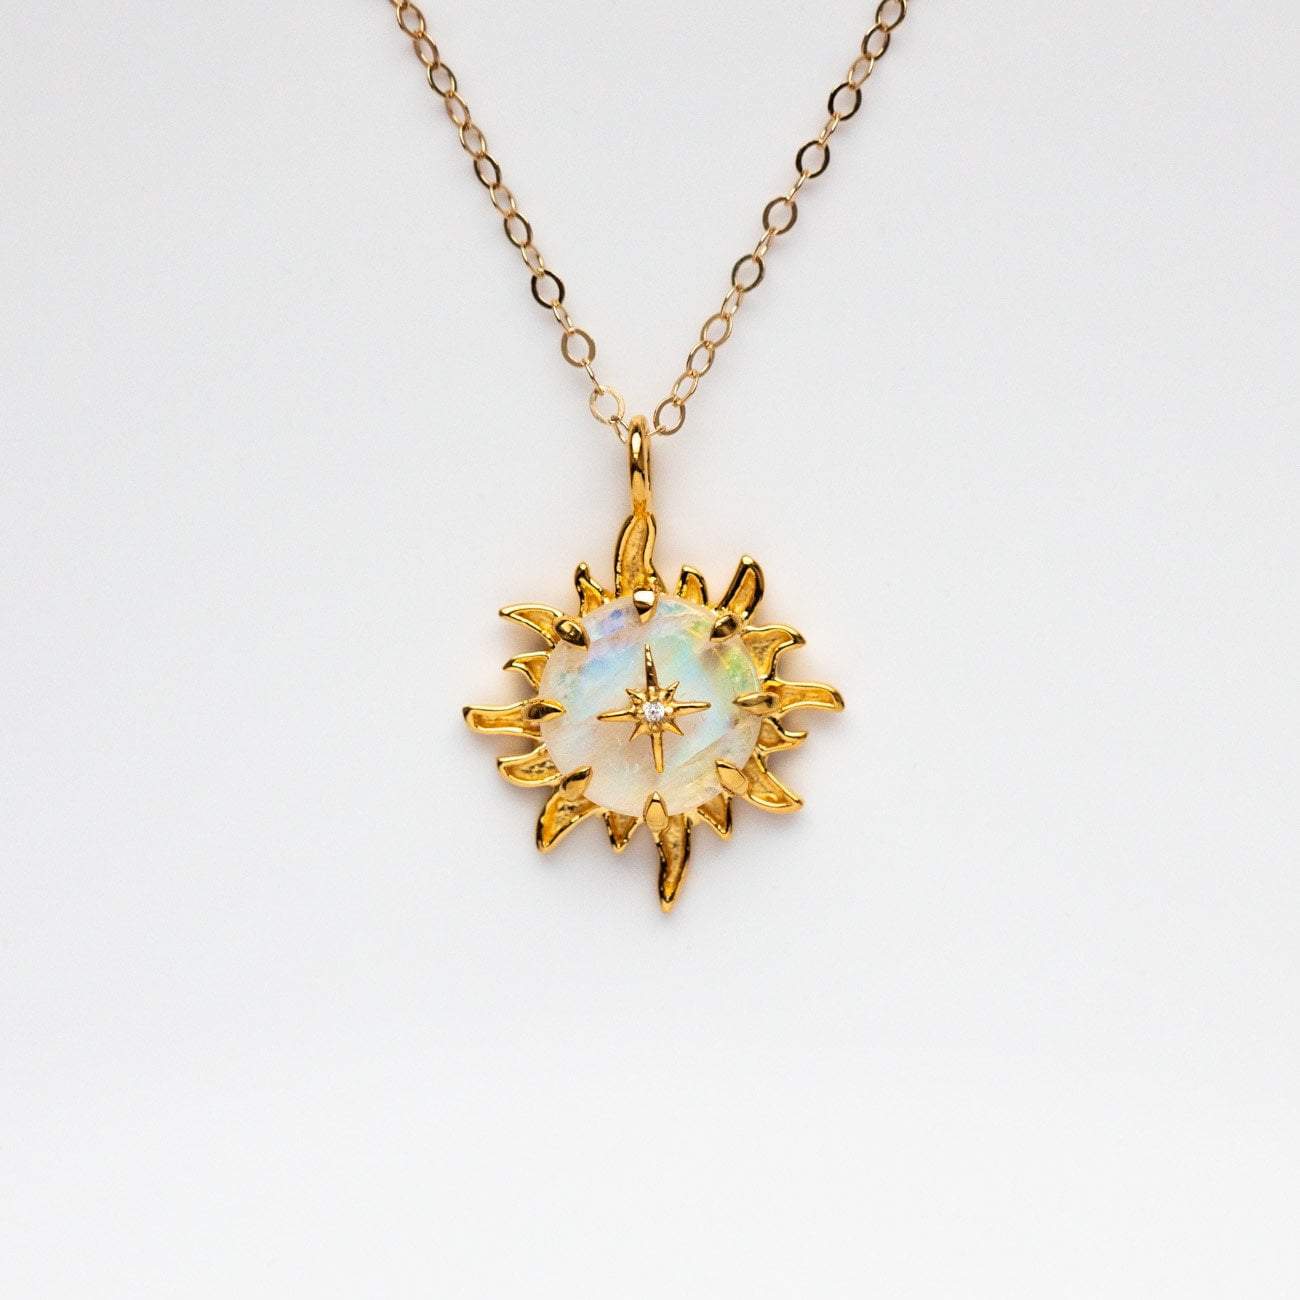 "You Are My Forever Sun, Moon & Star" Pendant necklaces La Kaiser 